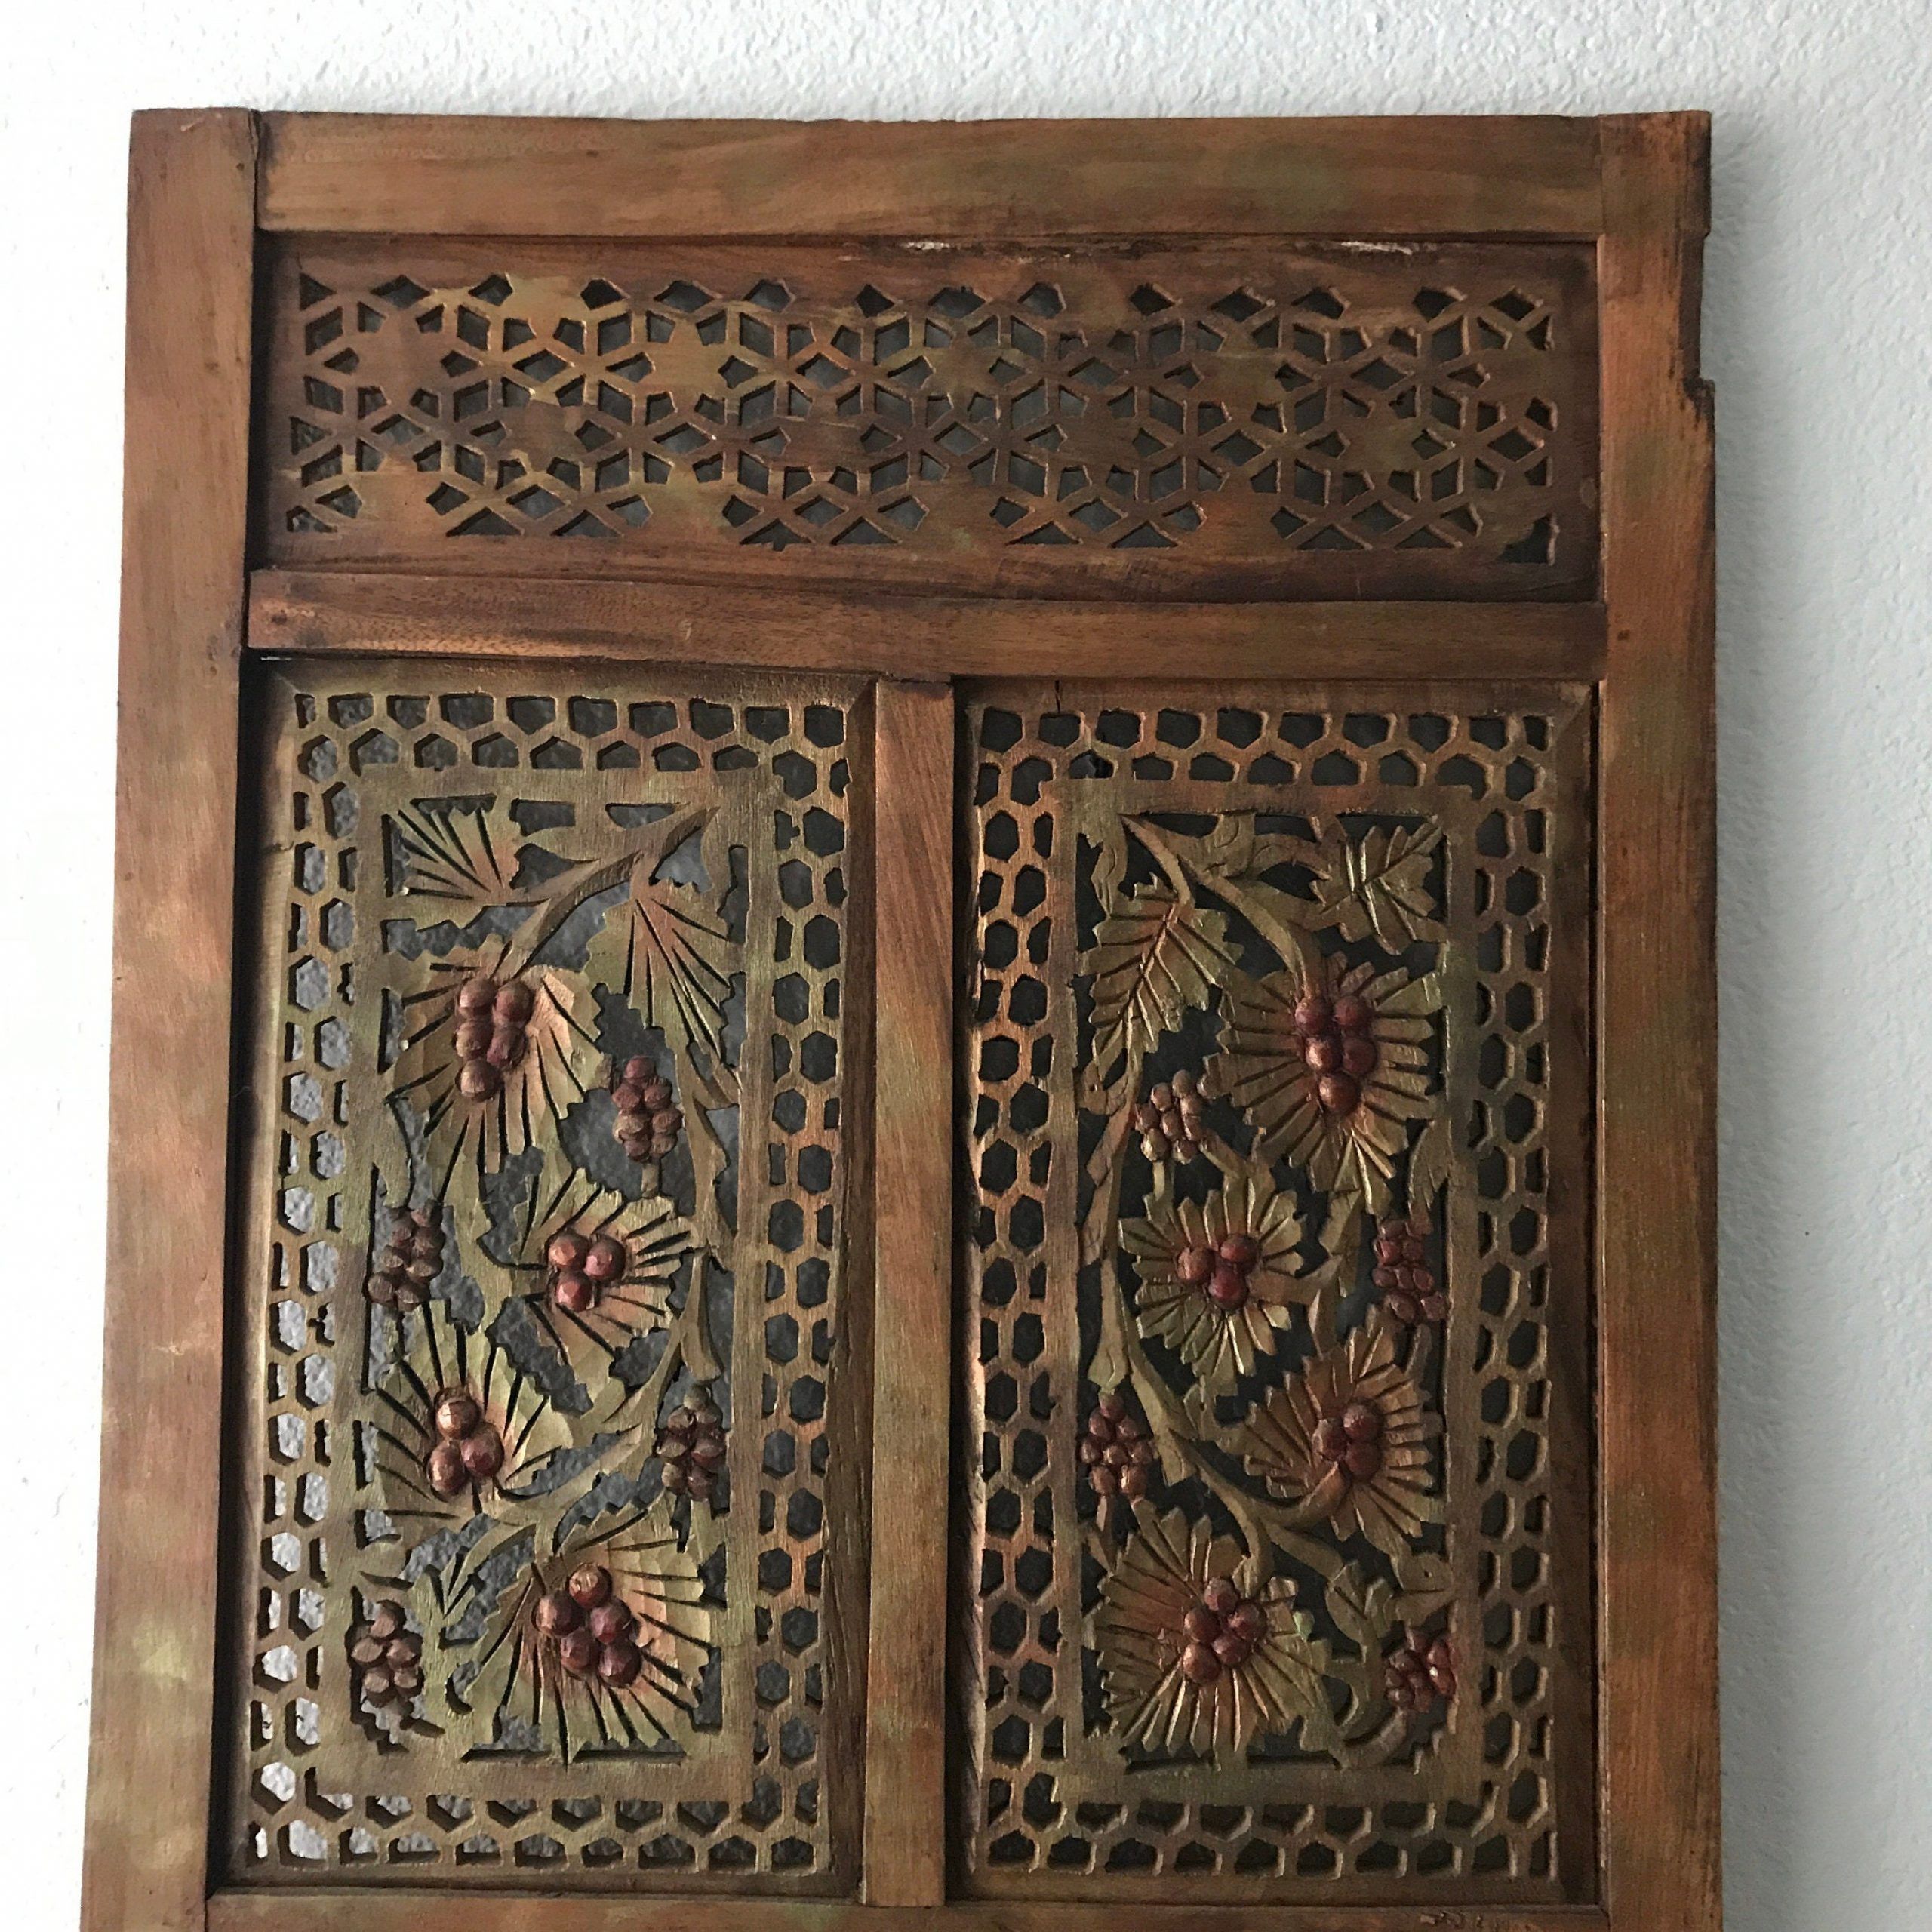 Well Known Filigree Screen Wall Art Inside Large Ornate Bohemian Carved Wooden Wall Art Panel / India Carved Wood (View 1 of 15)